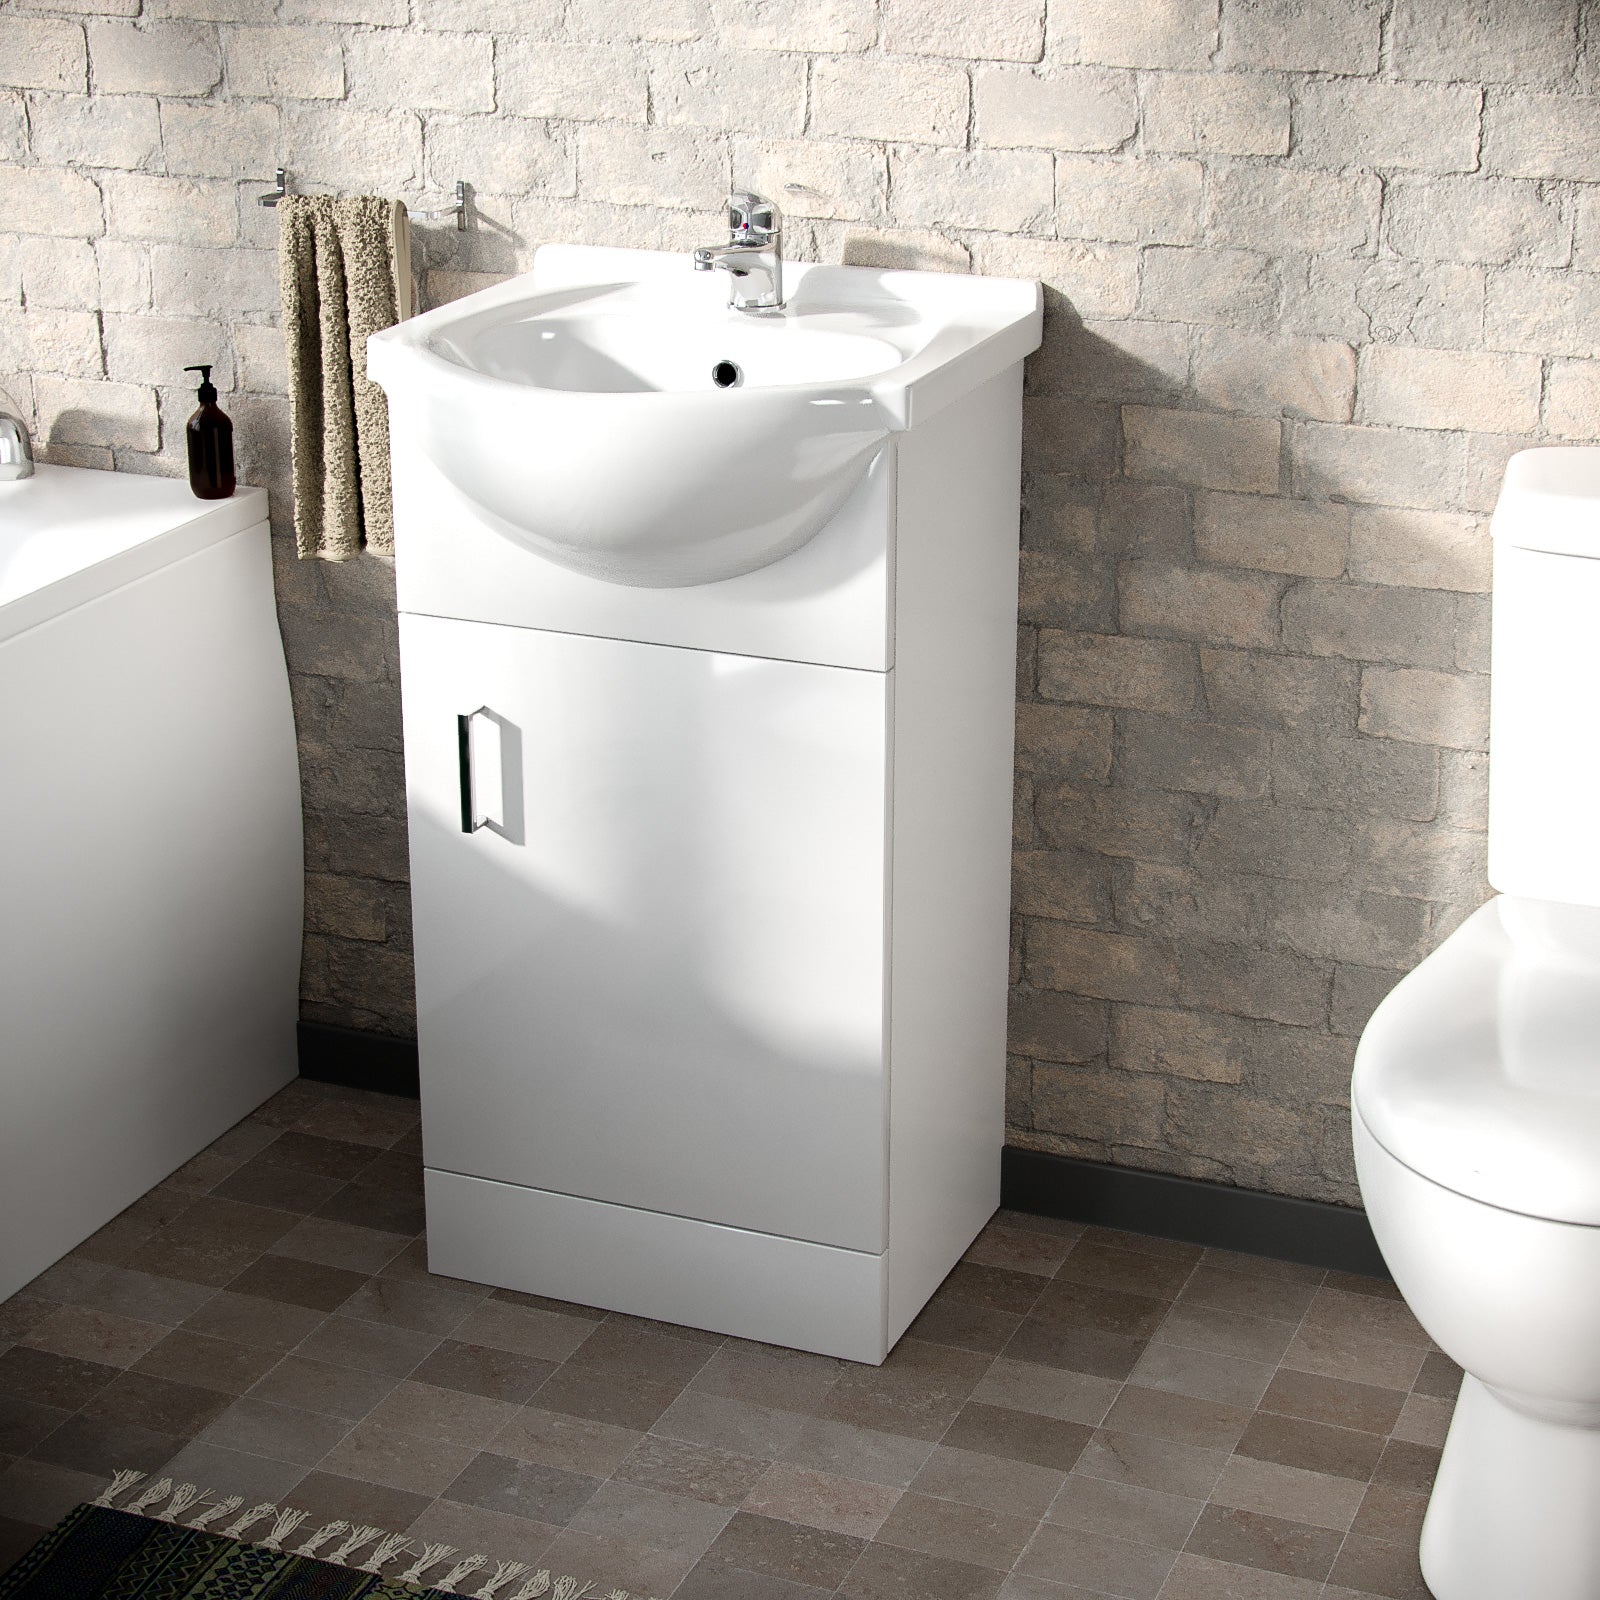 Nanuya Suite Set of 450mm White Basin Vanity and Close Coupled Toilet